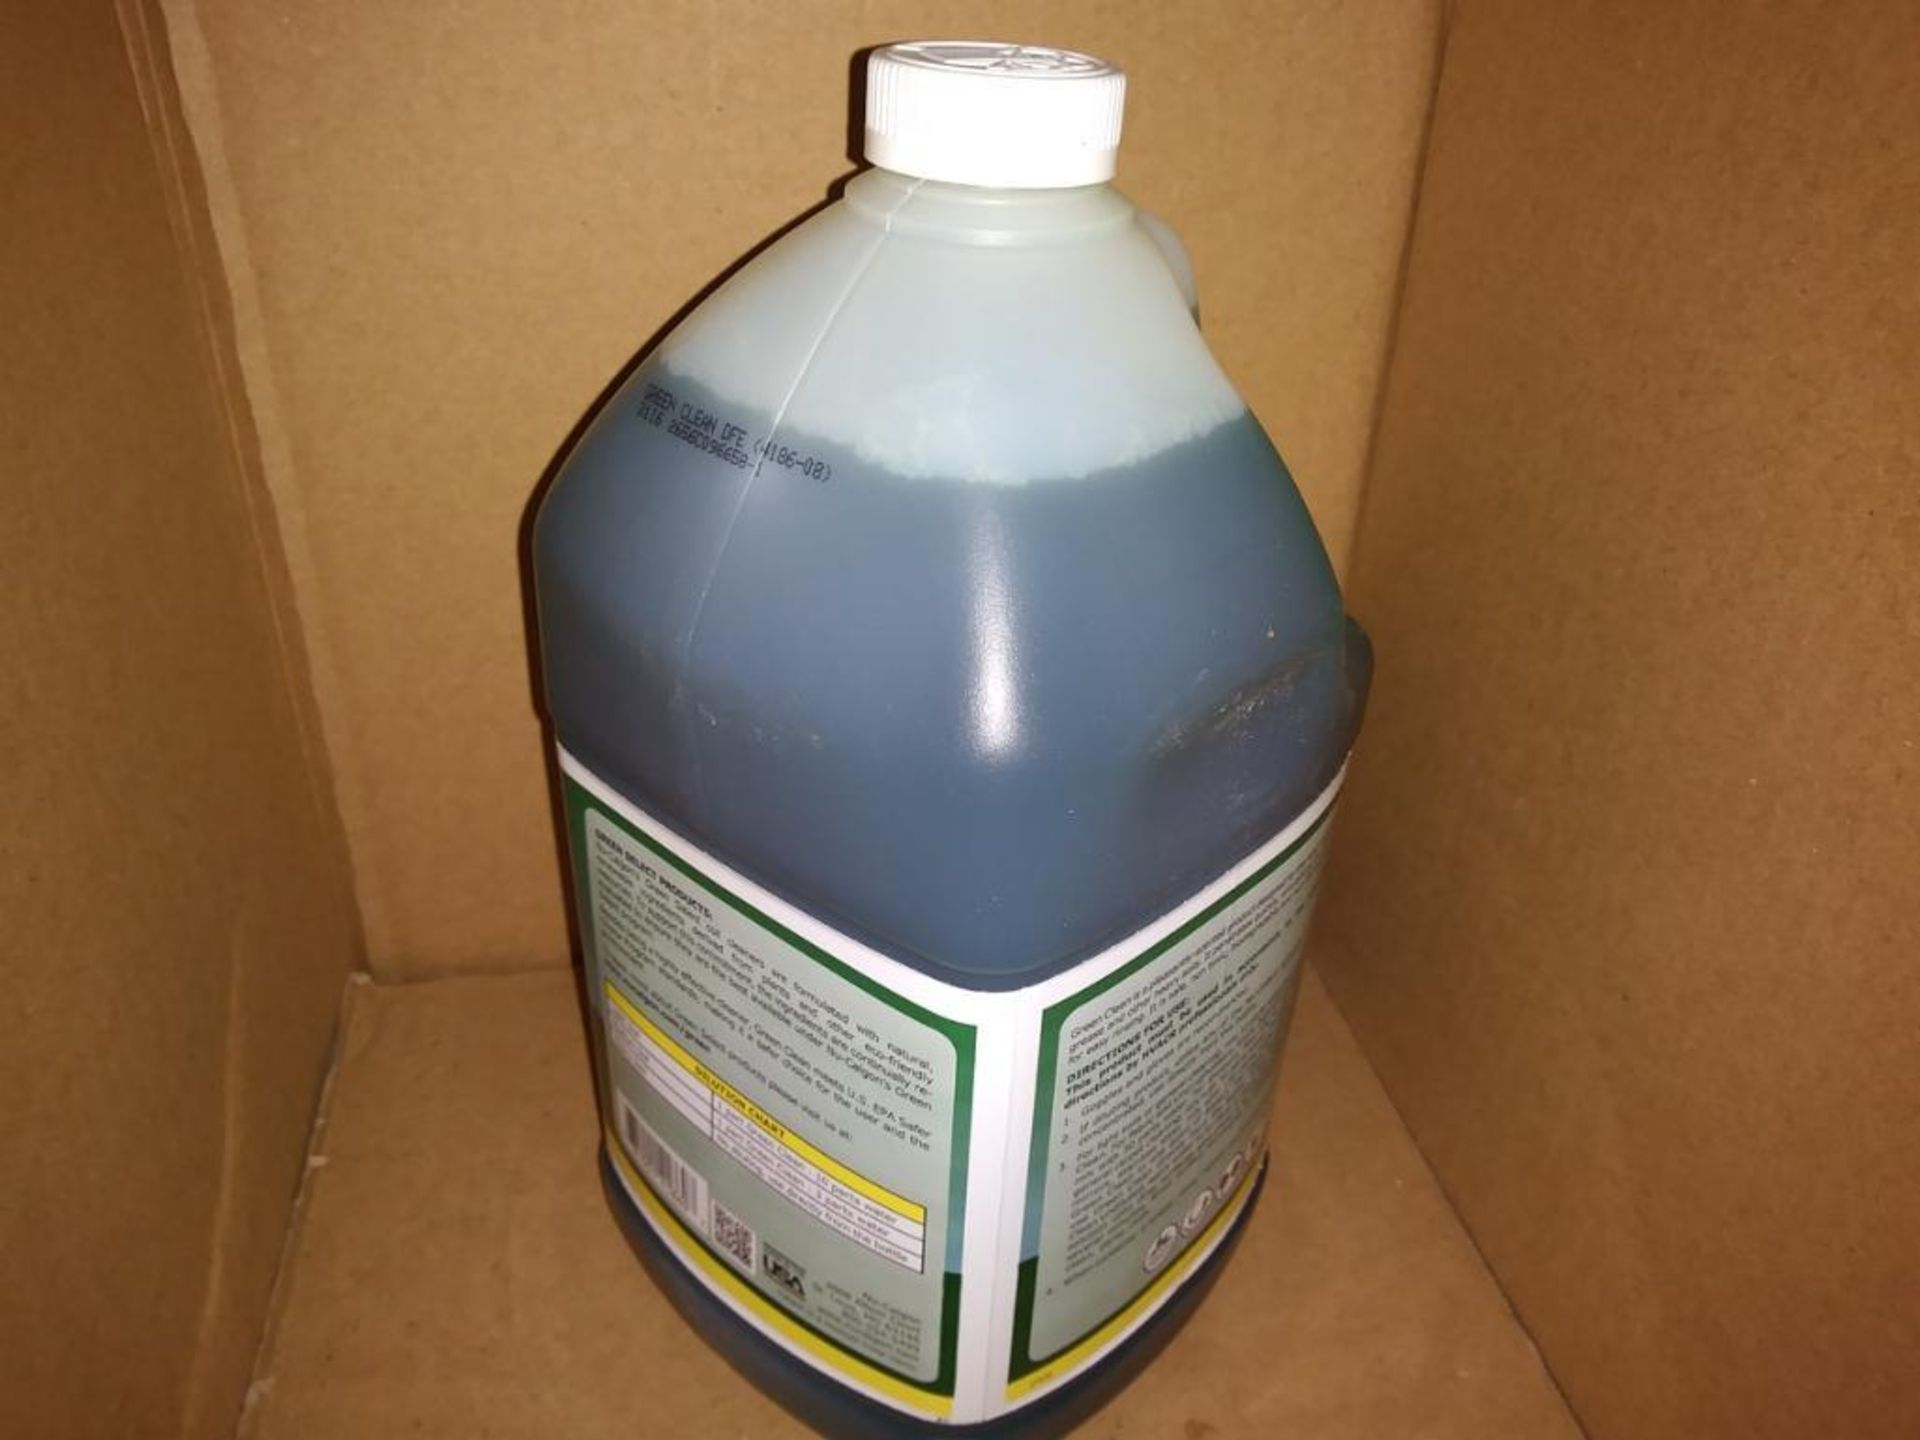 (22) Nu-Calgon 1-Gallon De-Greasing Solvents, Model 4162-07, Ozone-Safe, Degreases Cleans & Dries Wi - Image 15 of 16